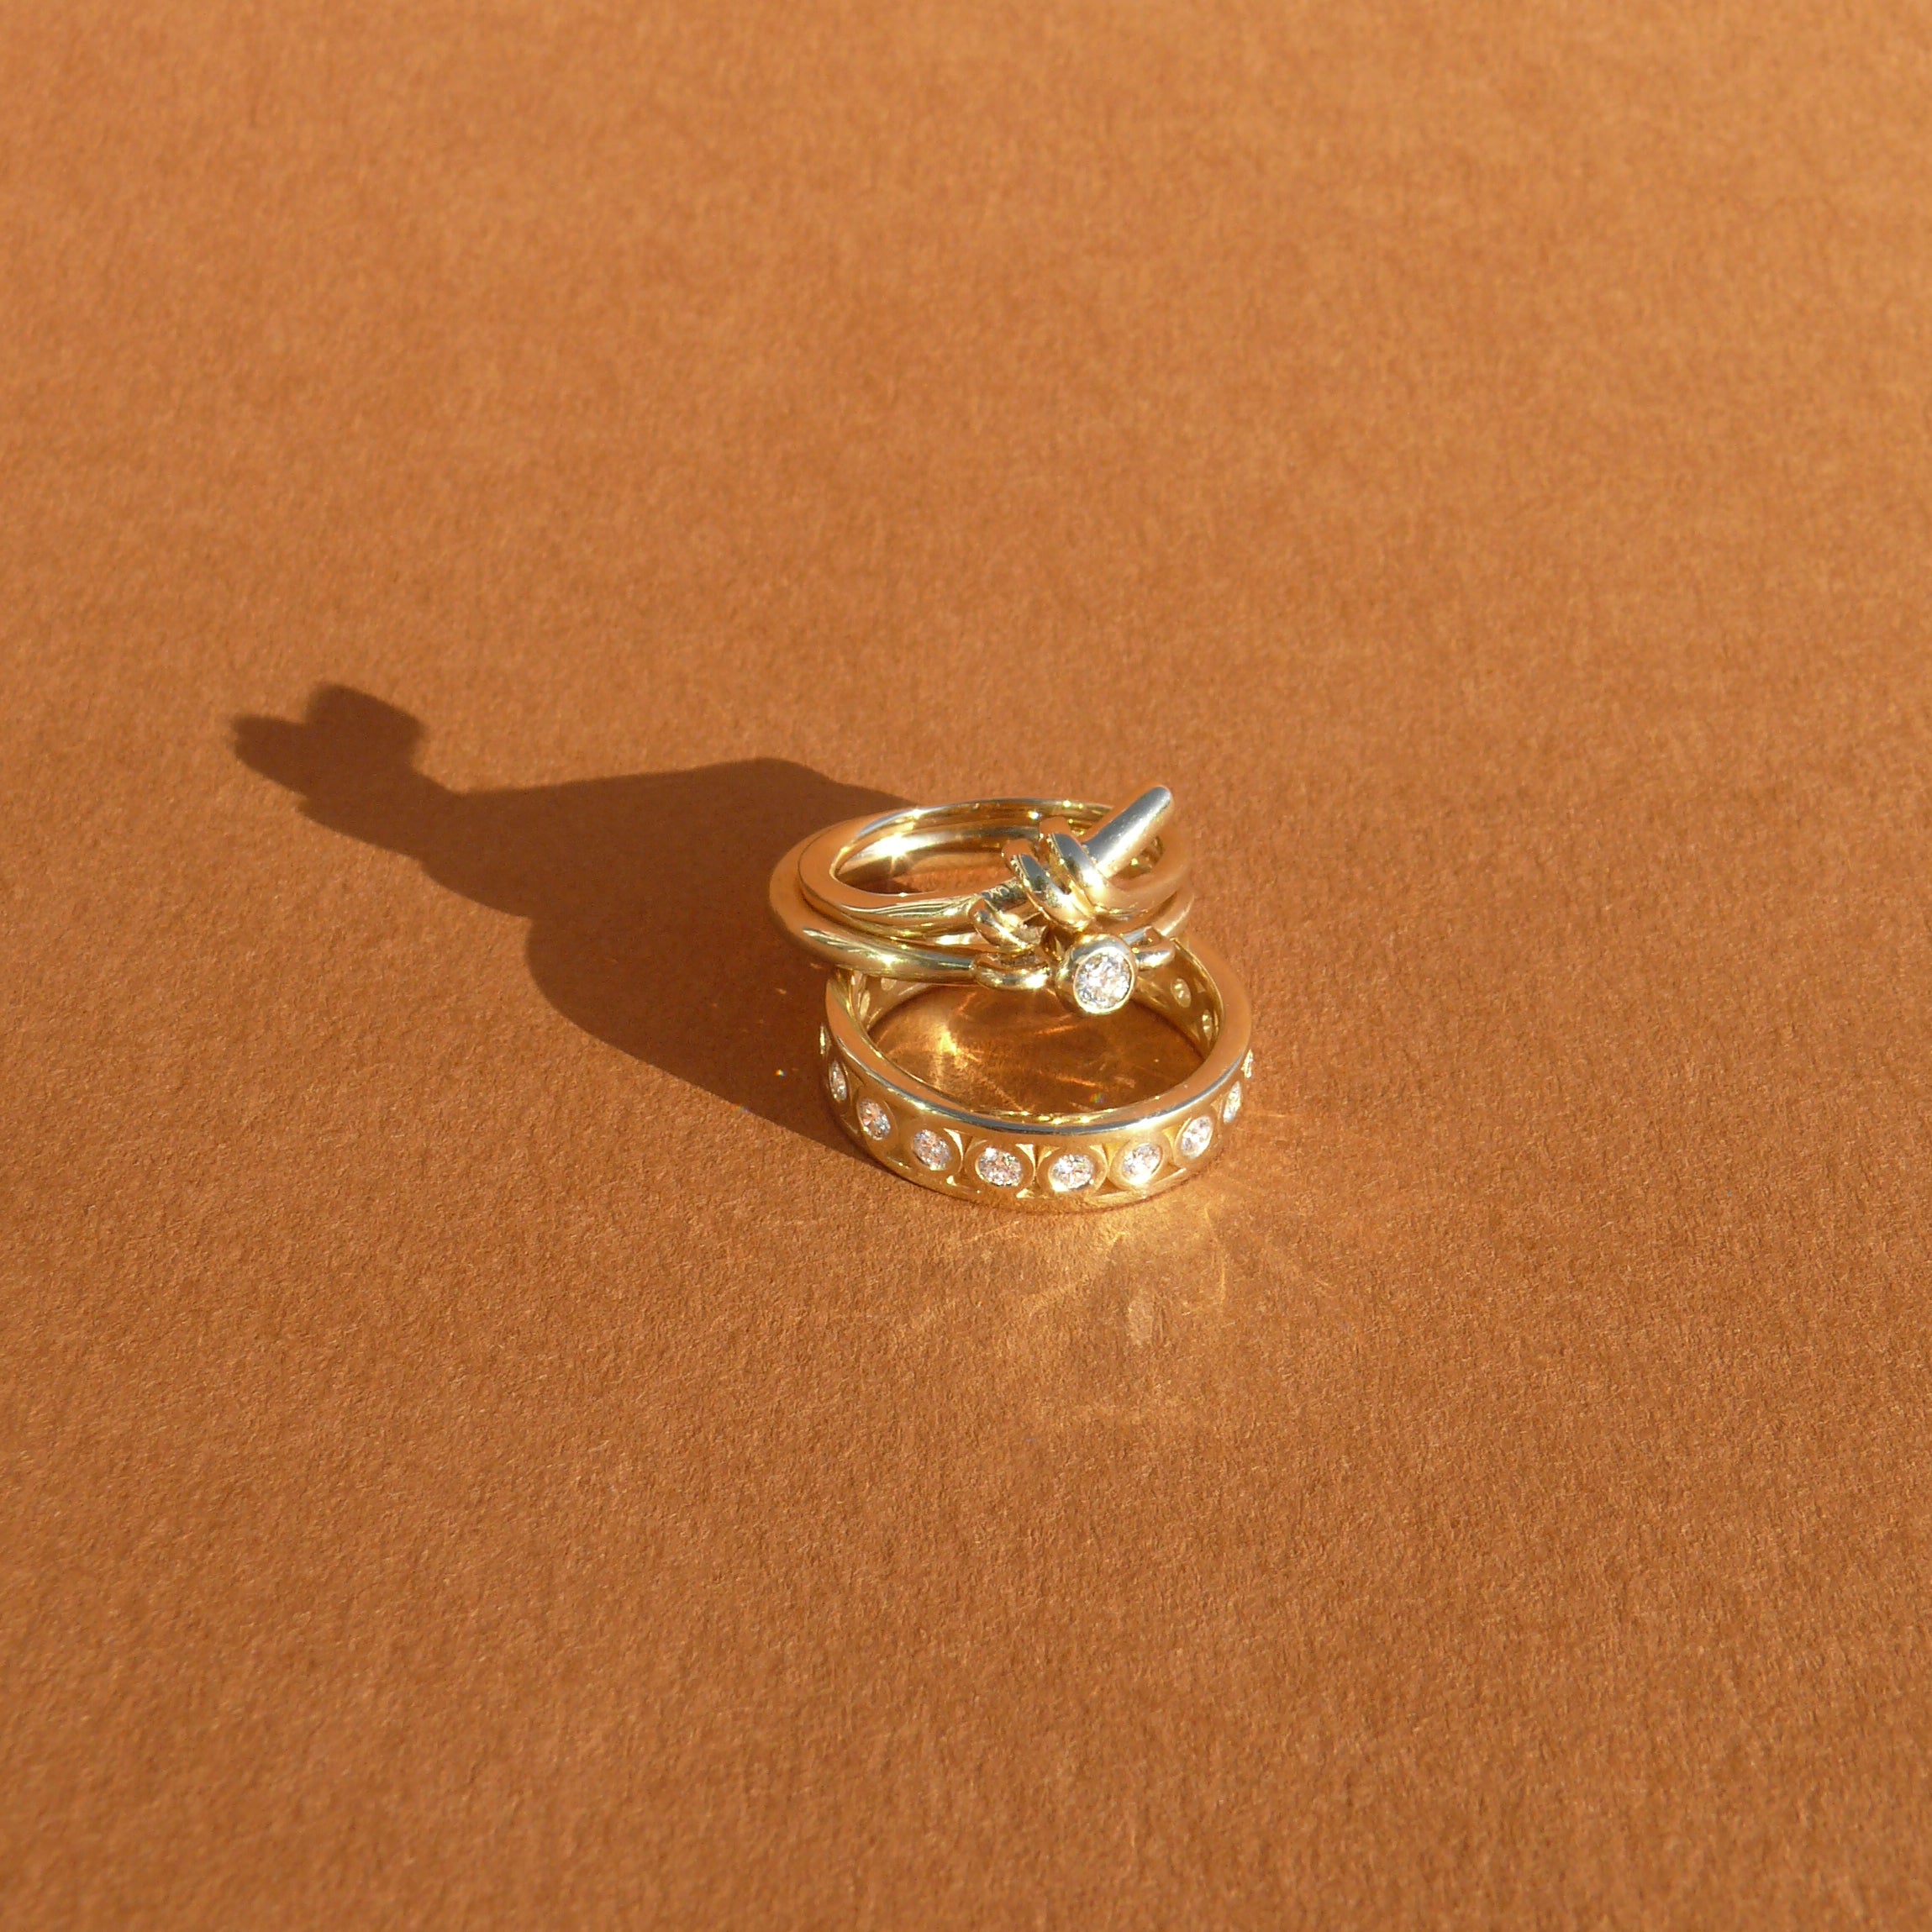 3mm recycled white diamond bezel set atop a 14k recycled yellow gold ring band with a silhouette of a vessel with round handles